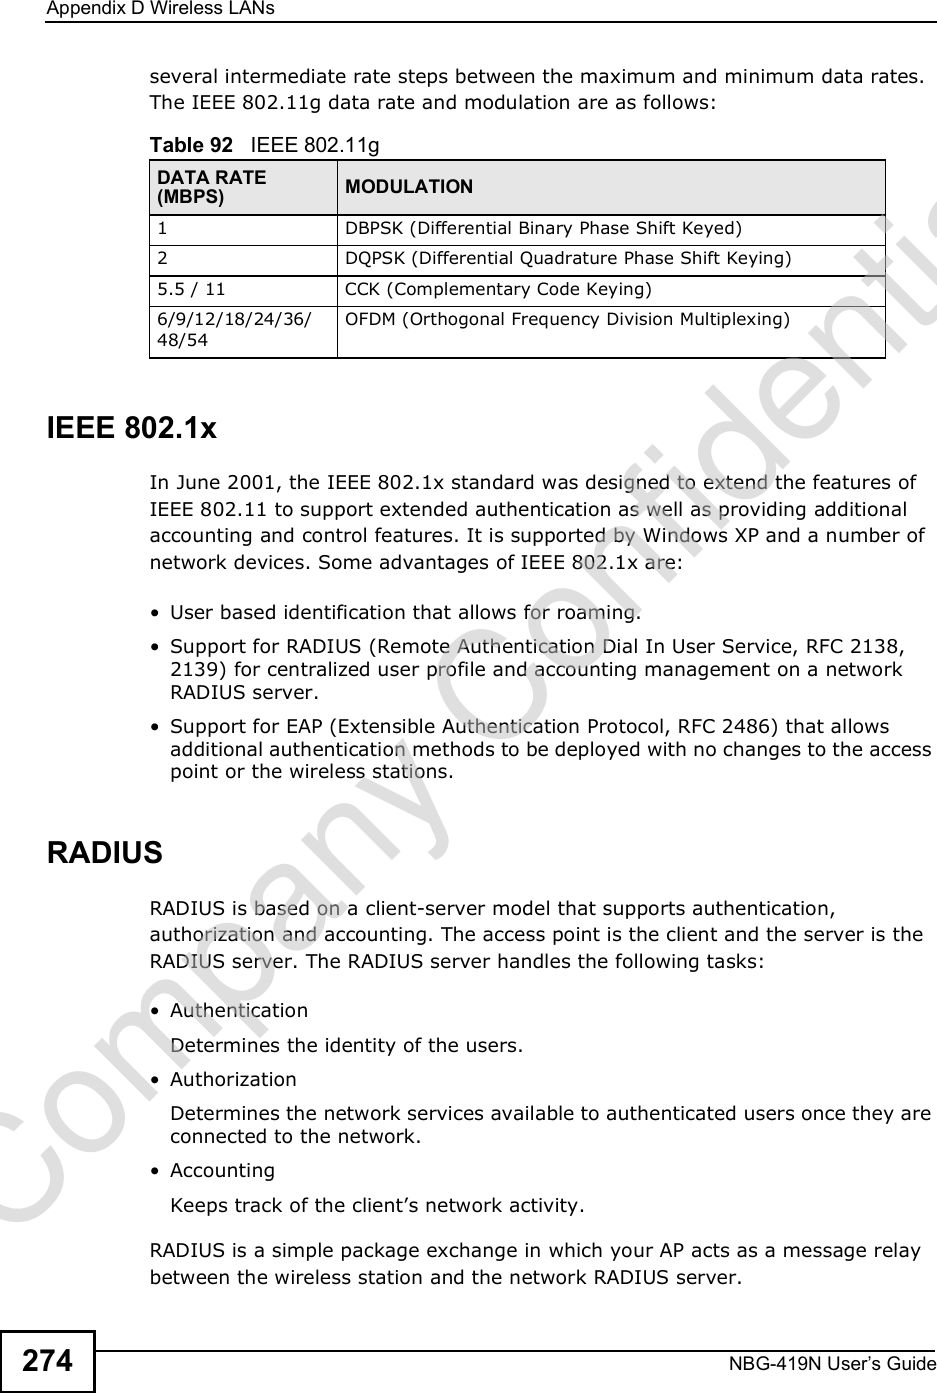 Appendix DWireless LANsNBG-419N User s Guide274several intermediate rate steps between the maximum and minimum data rates. The IEEE 802.11g data rate and modulation are as follows:IEEE 802.1xIn June 2001, the IEEE 802.1x standard was designed to extend the features of IEEE 802.11 to support extended authentication as well as providing additional accounting and control features. It is supported by Windows XP and a number of network devices. Some advantages of IEEE 802.1x are: User based identification that allows for roaming. Support for RADIUS (Remote Authentication Dial In User Service, RFC 2138, 2139) for centralized user profile and accounting management on a network RADIUS server.  Support for EAP (Extensible Authentication Protocol, RFC 2486) that allows additional authentication methods to be deployed with no changes to the access point or the wireless stations. RADIUSRADIUS is based on a client-server model that supports authentication, authorization and accounting. The access point is the client and the server is the RADIUS server. The RADIUS server handles the following tasks: Authentication Determines the identity of the users. AuthorizationDetermines the network services available to authenticated users once they are connected to the network. AccountingKeeps track of the client!s network activity. RADIUS is a simple package exchange in which your AP acts as a message relay between the wireless station and the network RADIUS server. Table 92   IEEE 802.11gDATA RATE (MBPS) MODULATION1DBPSK (Differential Binary Phase Shift Keyed)2DQPSK (Differential Quadrature Phase Shift Keying)5.5 / 11CCK (Complementary Code Keying) 6/9/12/18/24/36/48/54OFDM (Orthogonal Frequency Division Multiplexing) Company Confidential